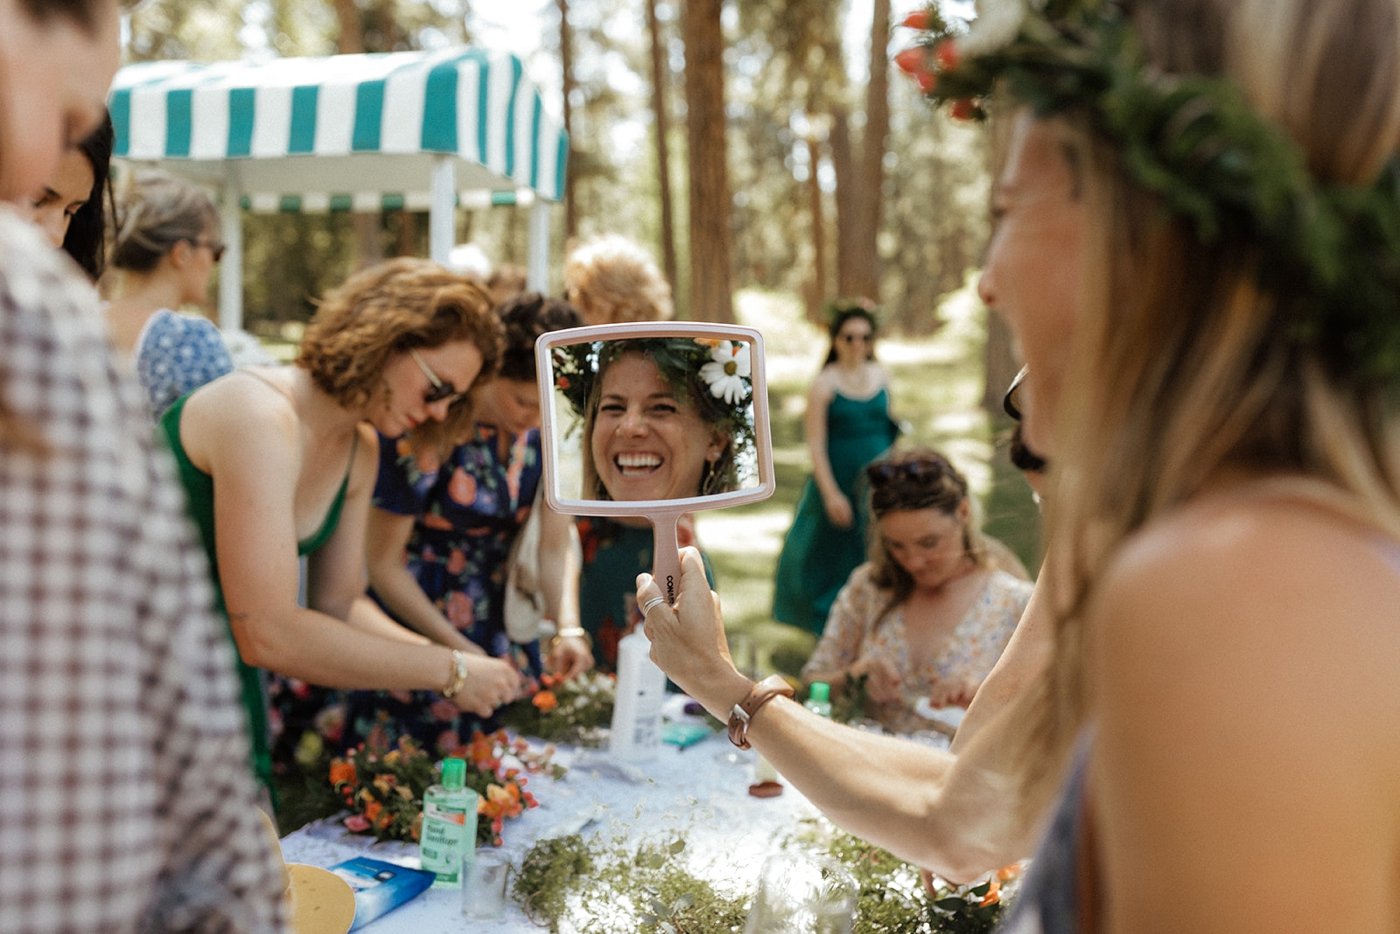 Guests making Midsummer flower crowns for an afternoon wedding